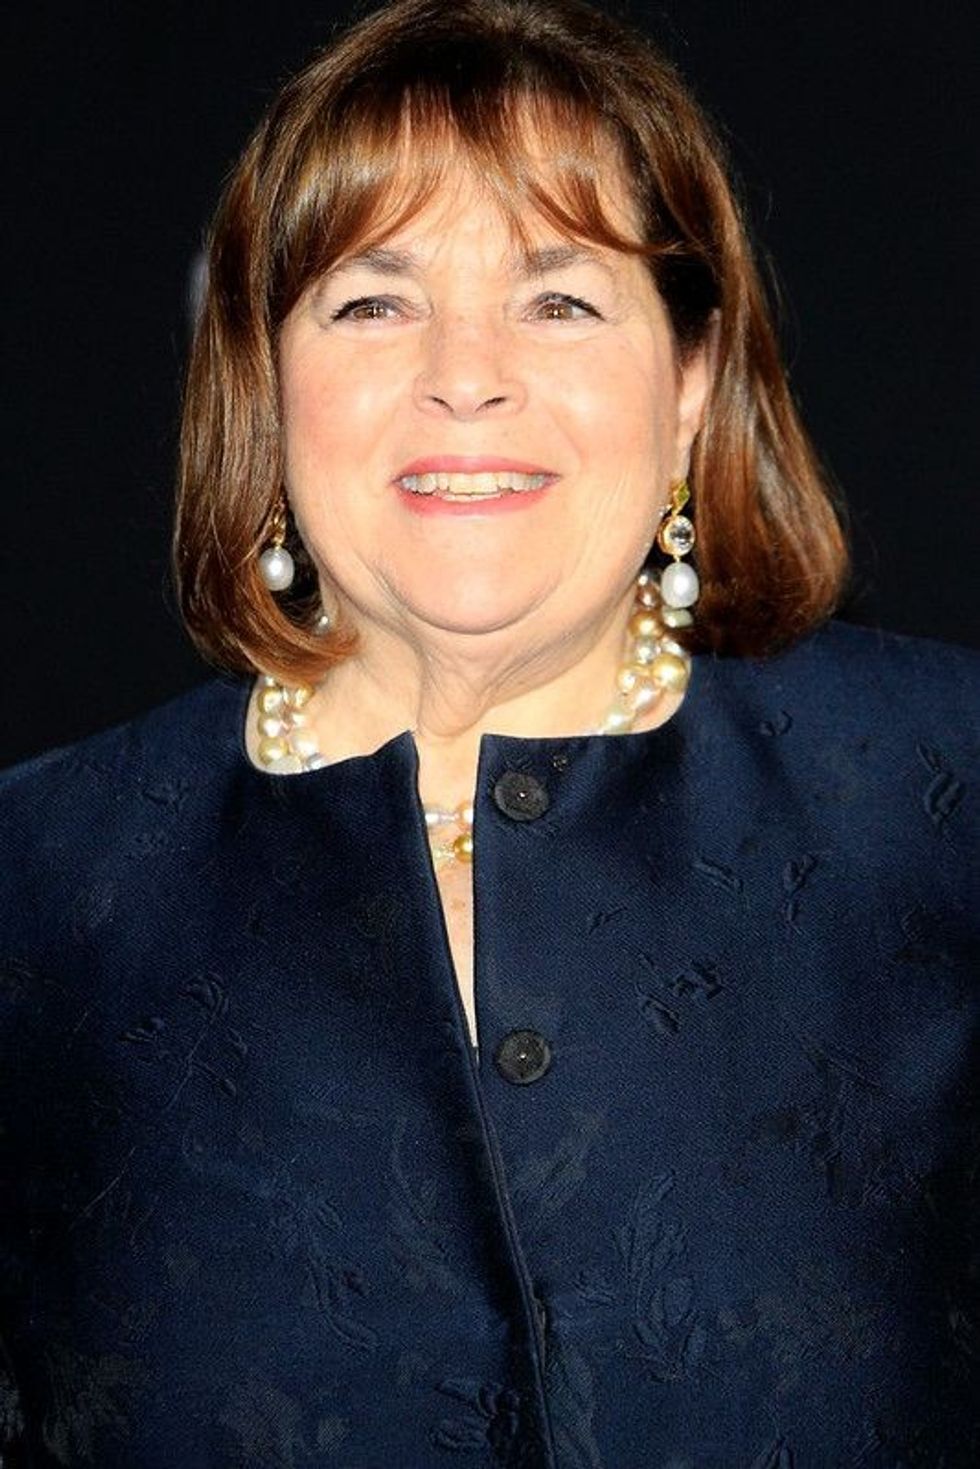 Ina Garten is the author of several famous cookbooks.